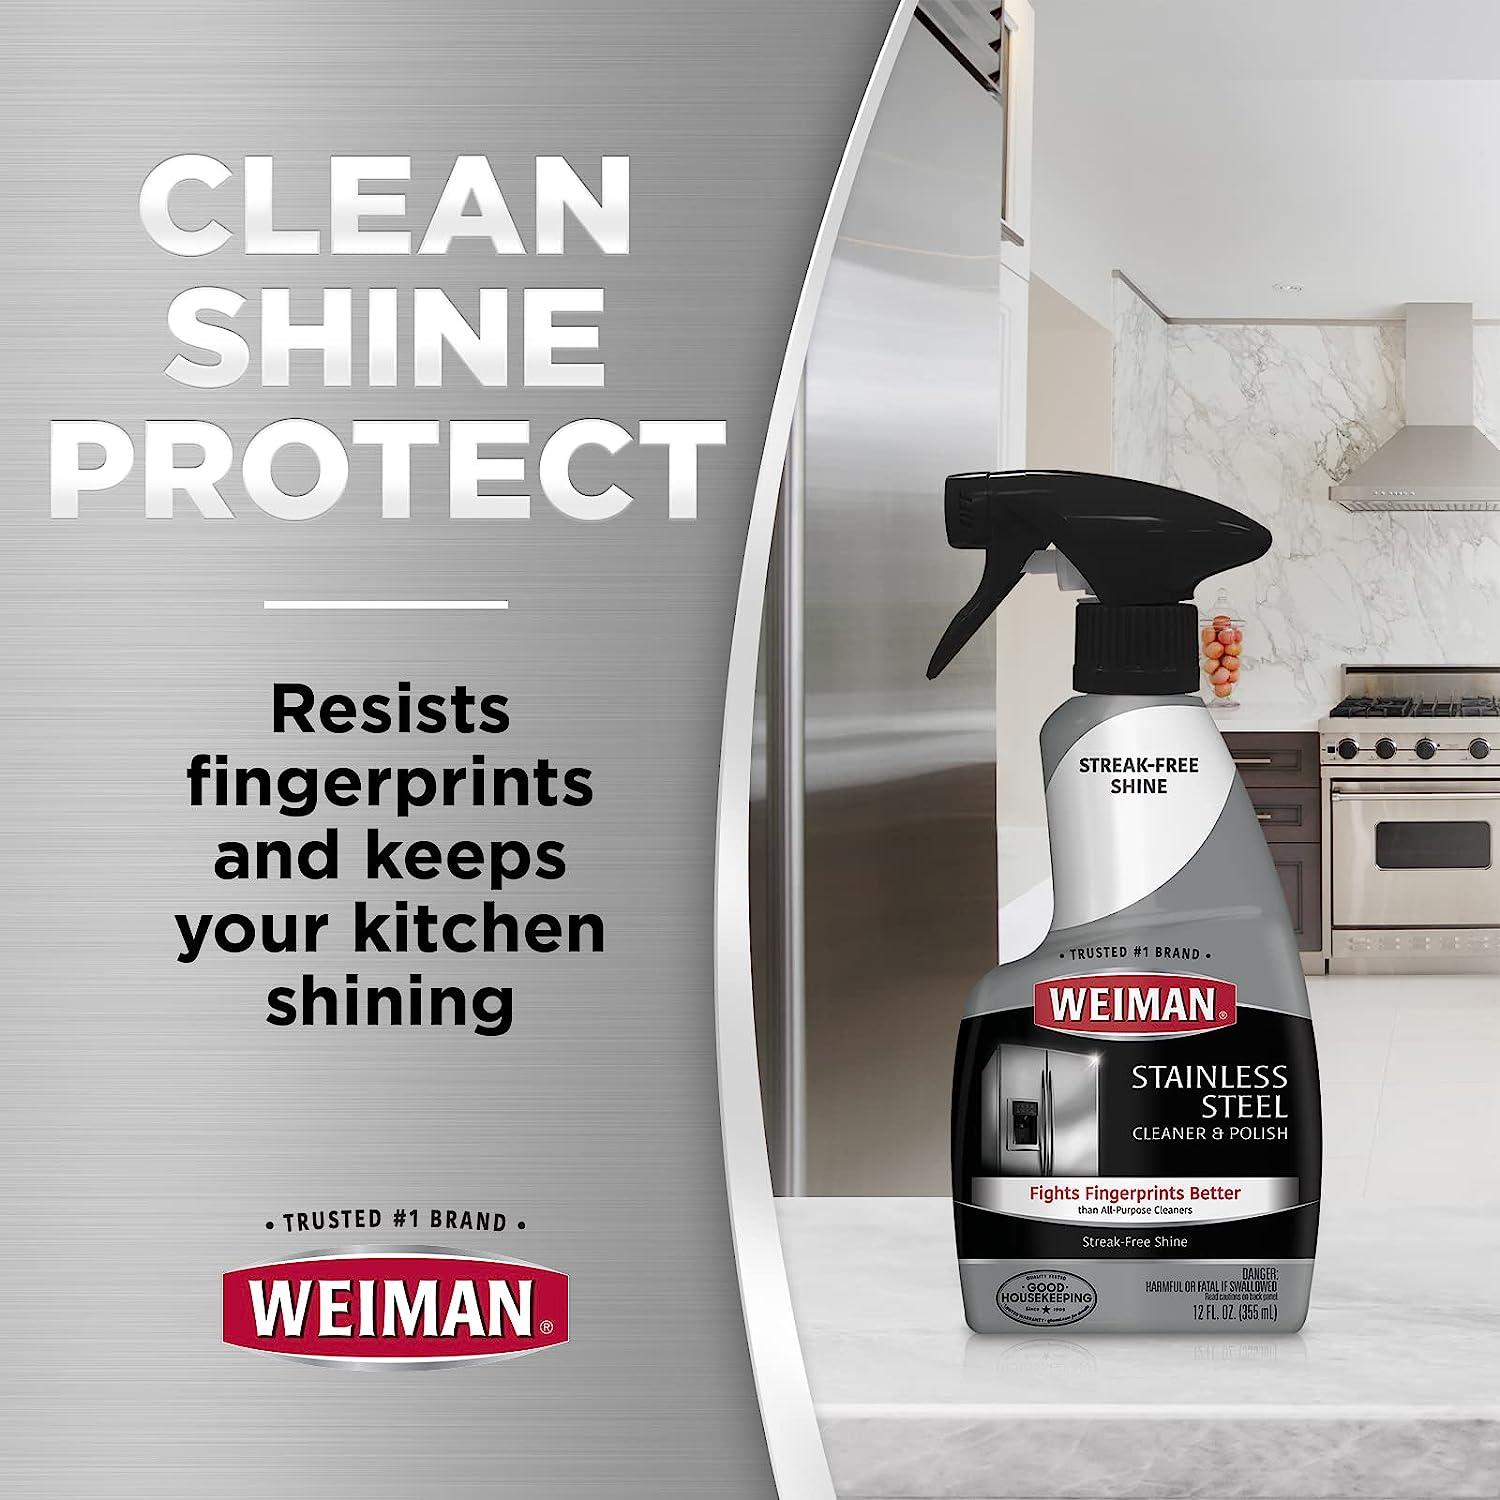 Weiman Stainless Steel Cleaner Wipes (3 Pack) Removes Fingerprints